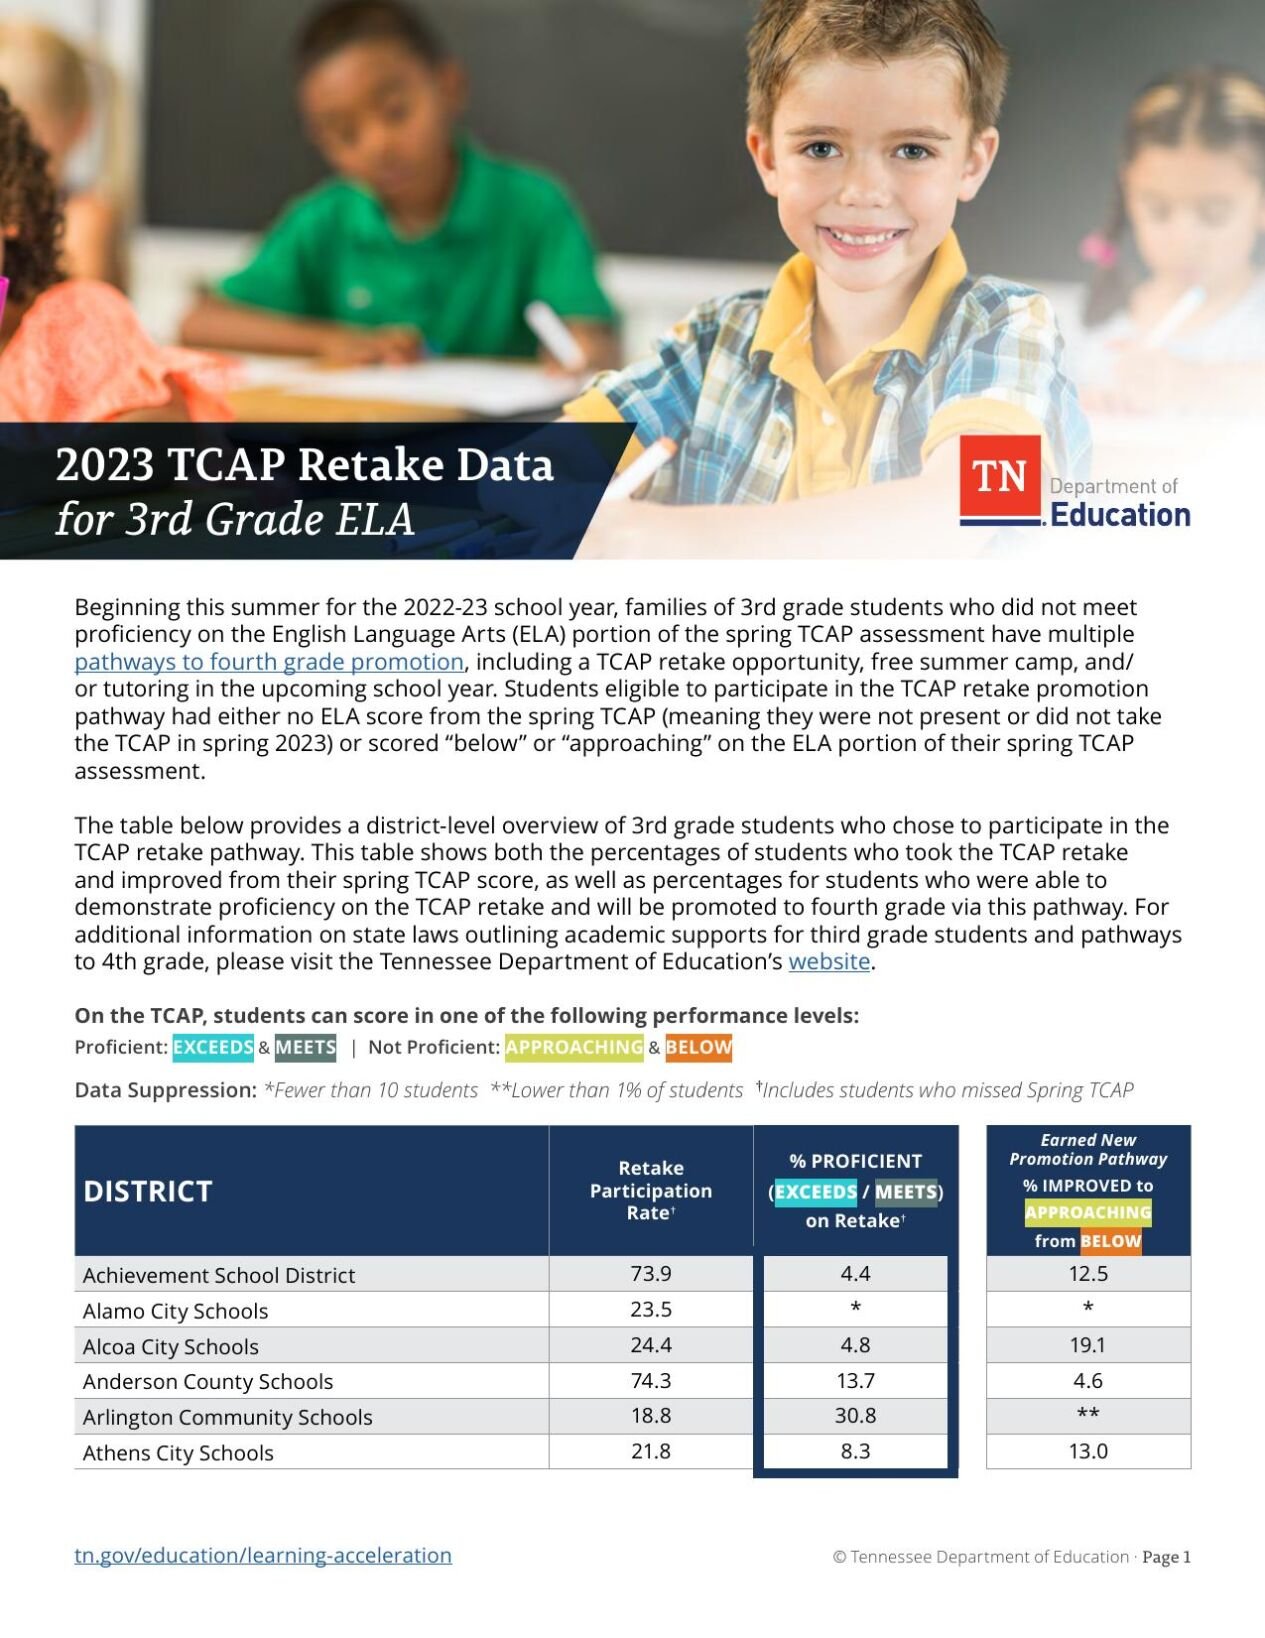 TCAP retake results for MSCS and other Tennessee school districts